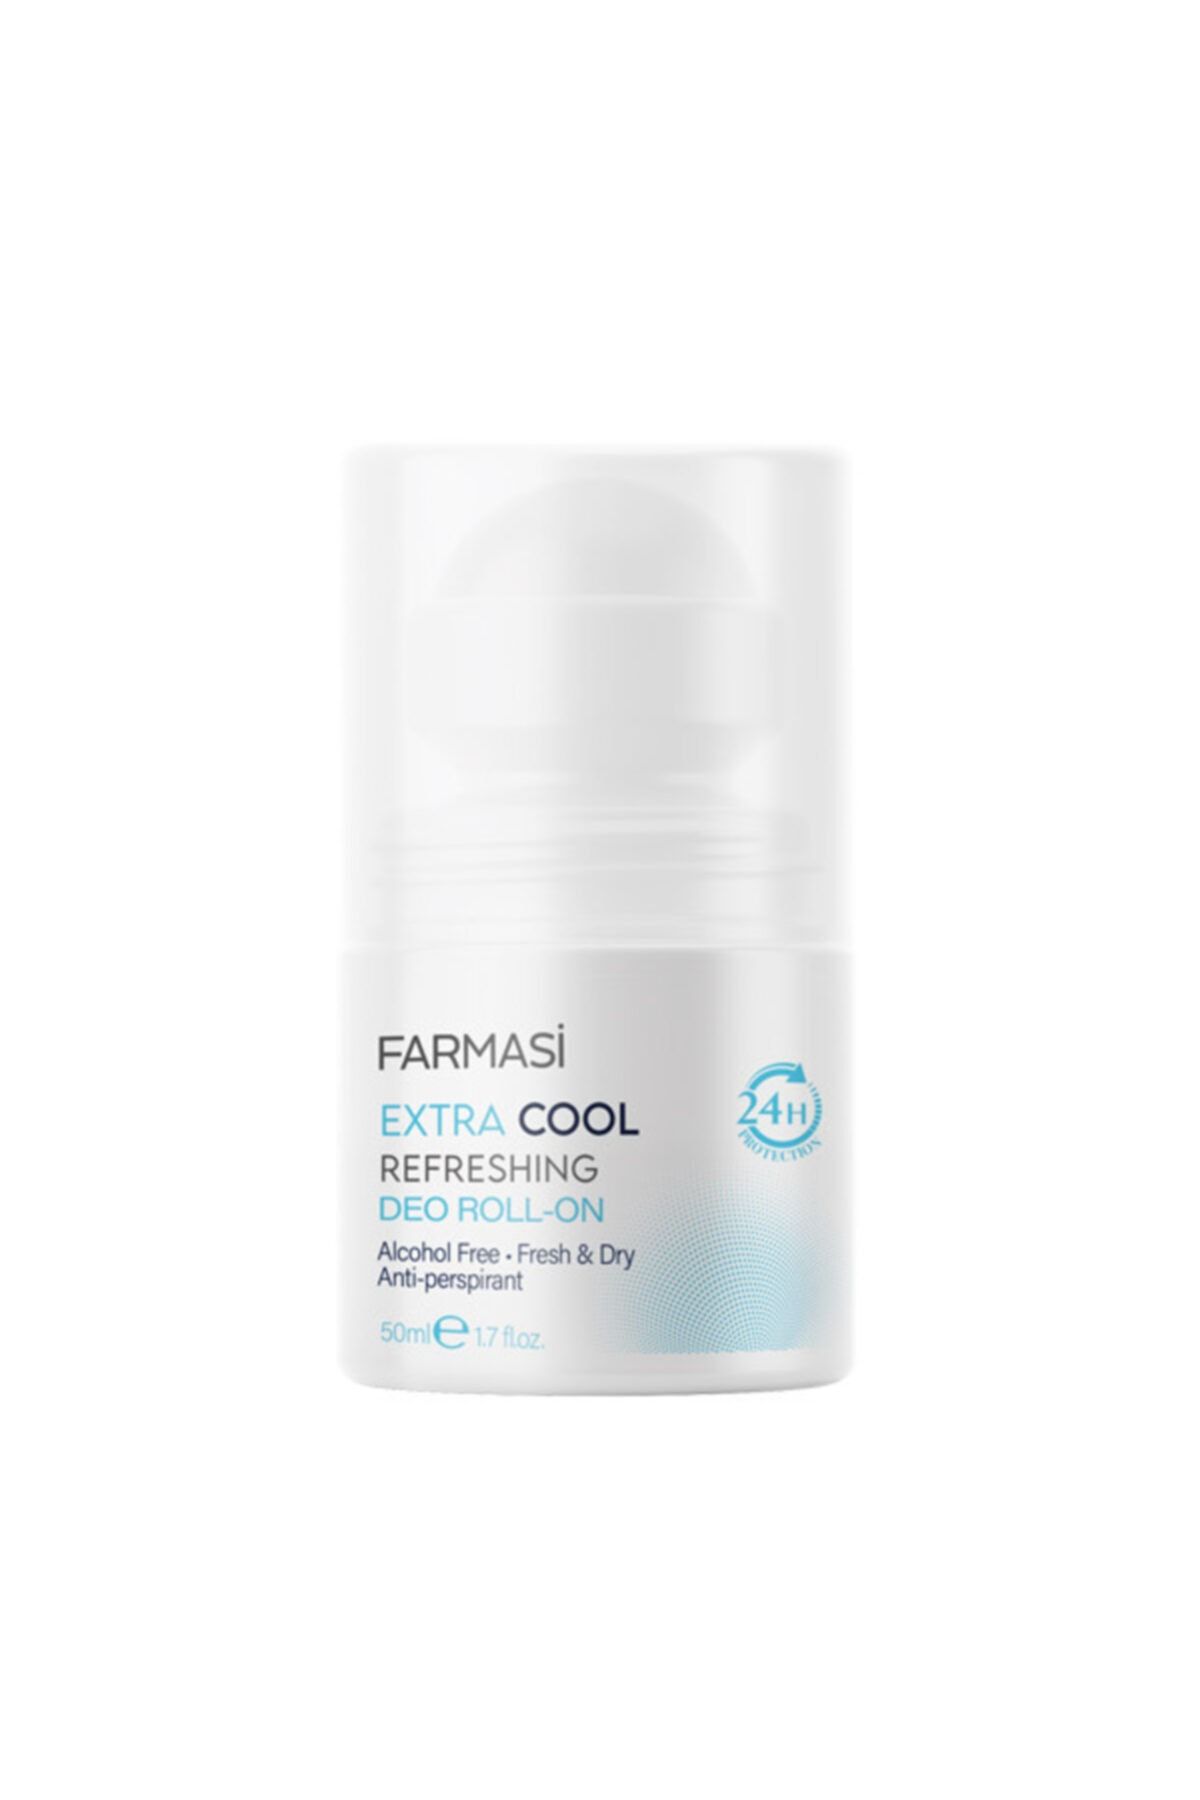 Farmasi Extra Cool Refreshıng Deo Roll-on